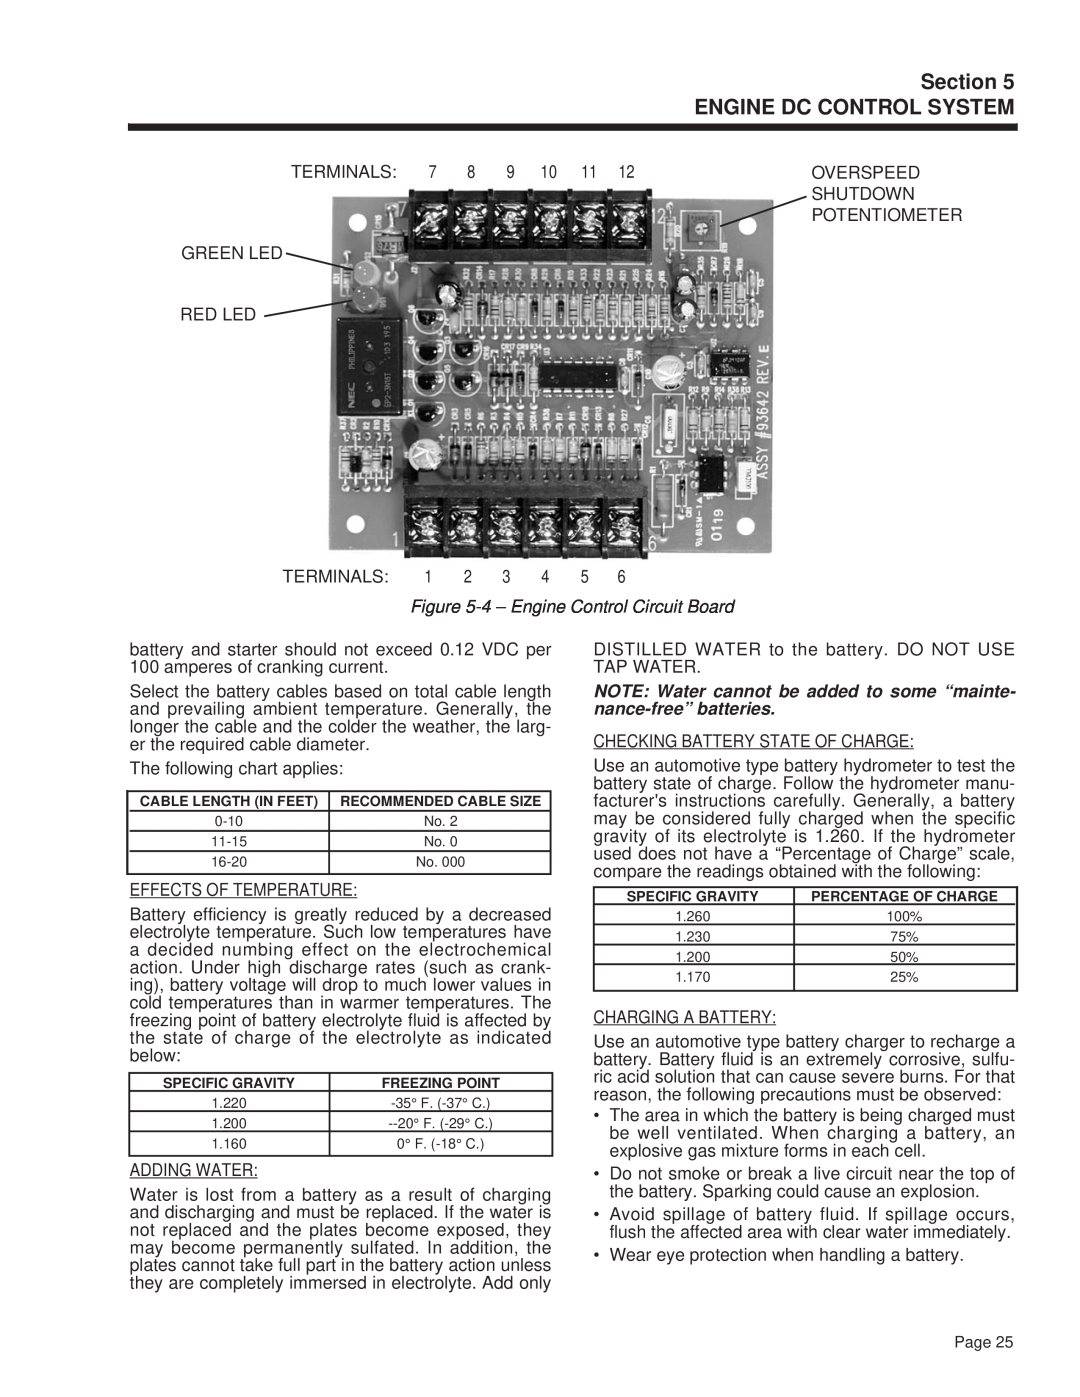 Guardian Technologies 4270 manual Section, Engine Dc Control System, 4 - Engine Control Circuit Board 